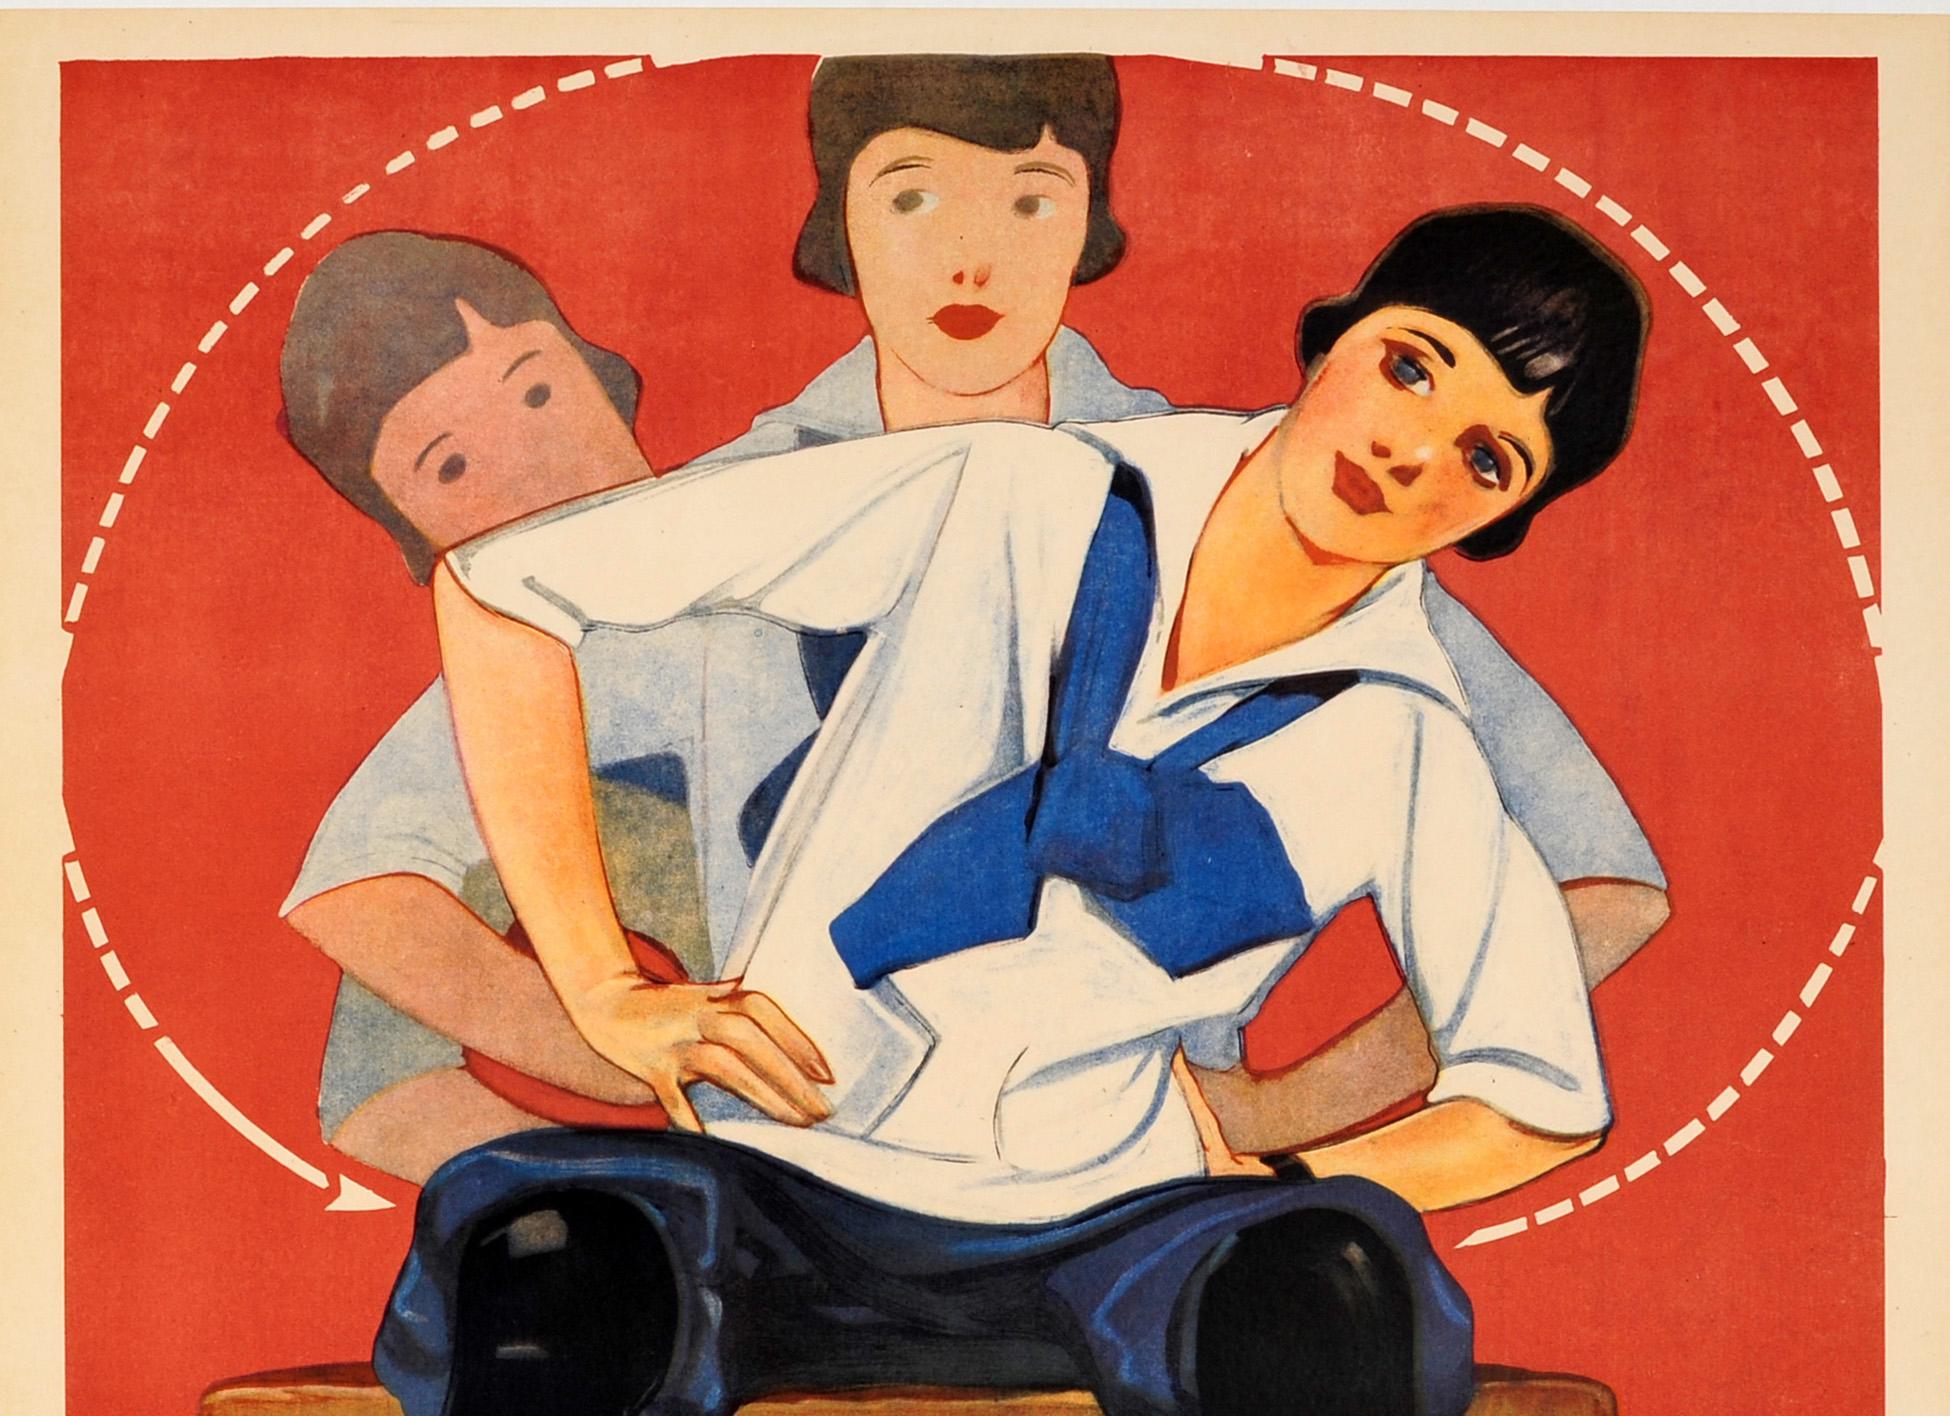 Original vintage sport propaganda poster issued by the Young Women's Christian Association Y.W.C.A – Join the Gym – featuring a great illustration promoting health and fitness showing a young lady wearing a smart white shirt and blue neck scarf